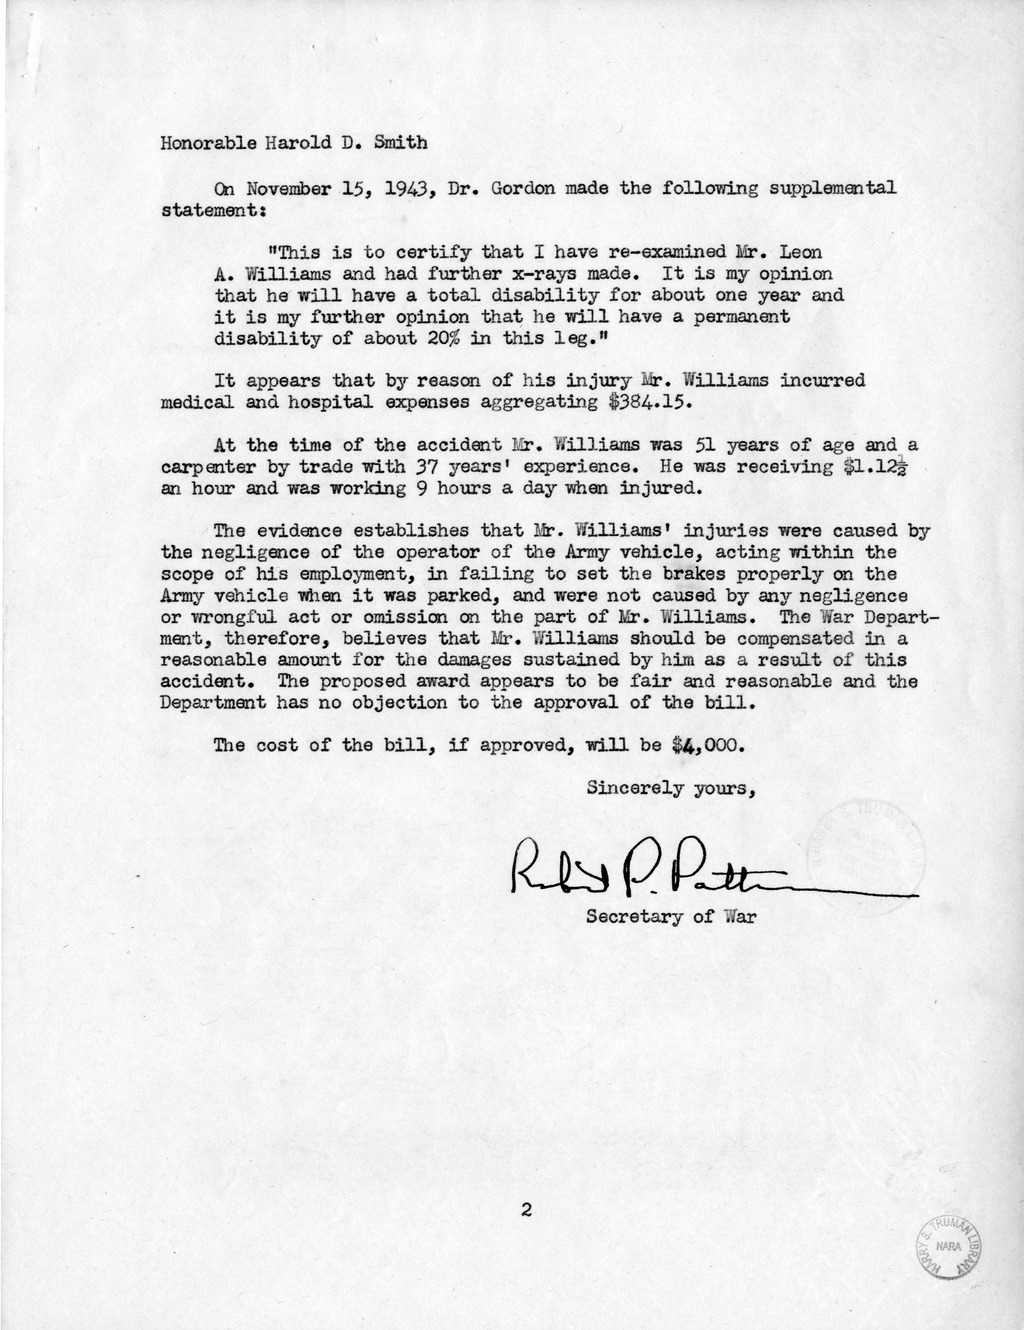 Memorandum from Frederick J. Bailey to M. C. Latta, H.R. 1958, For the Relief of L. A. Williams, with Attachments